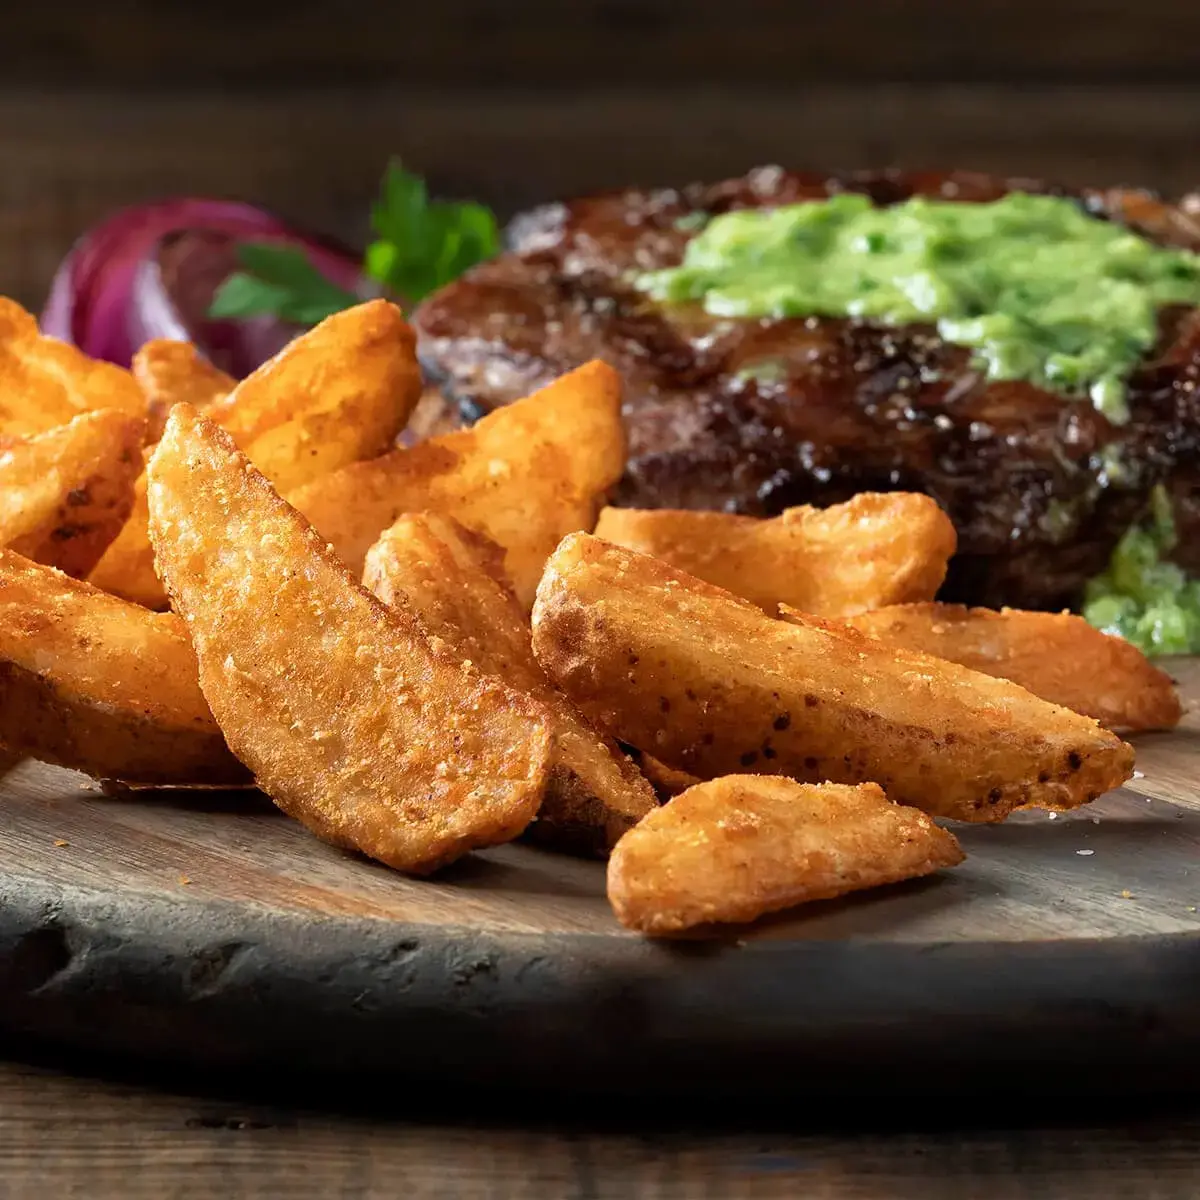 Steak and Wedge Fries with Avocado Maitre D' Butter Recipe Card